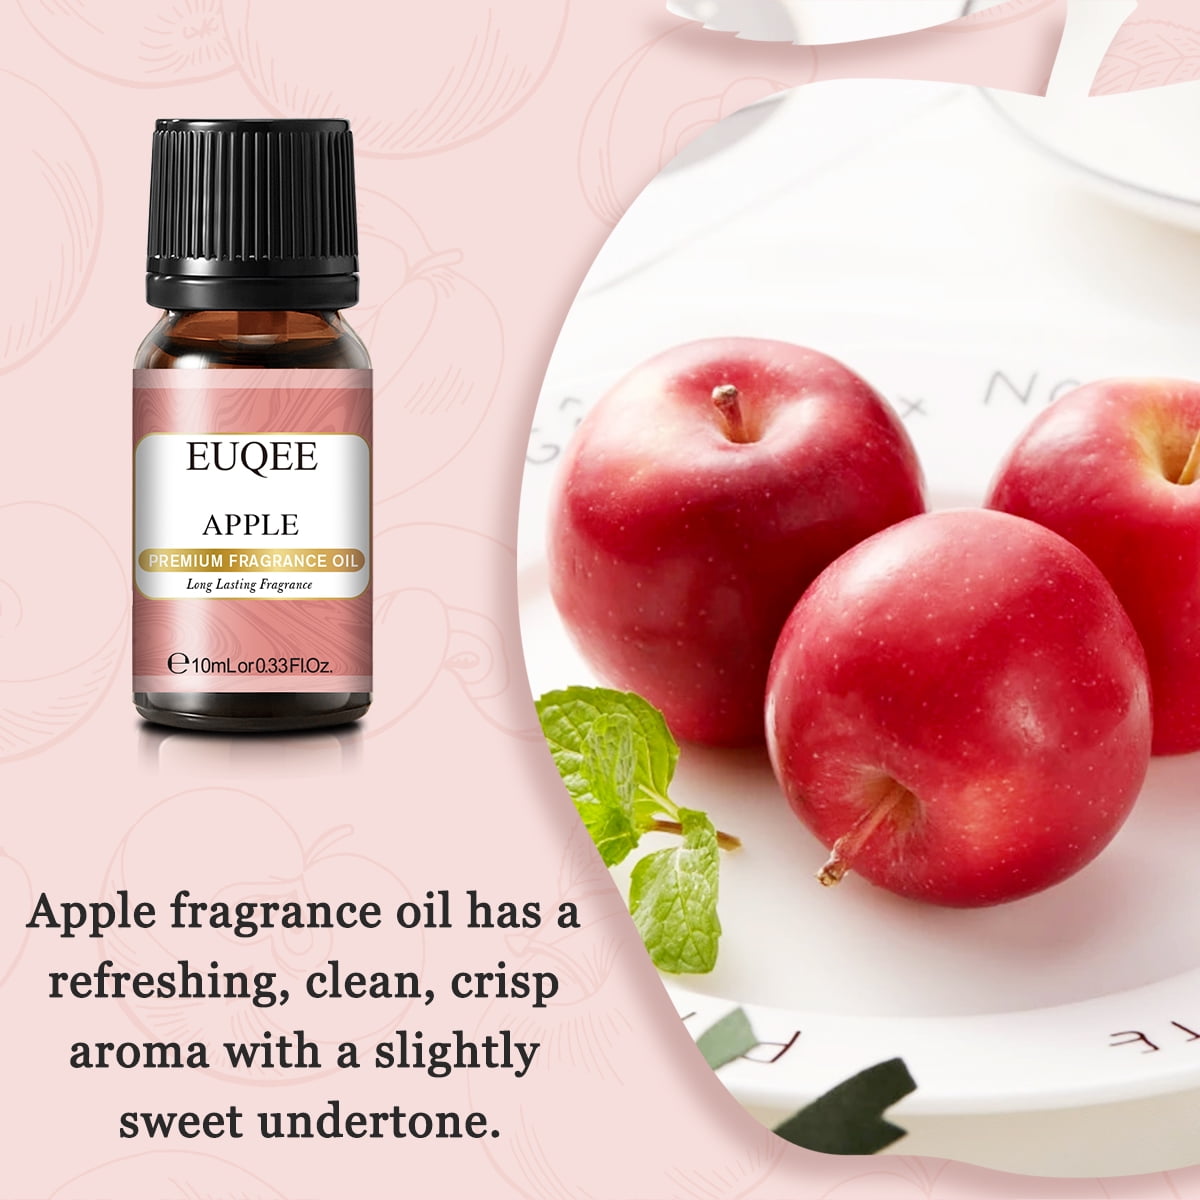 Glass bottle of apple essential oil near fresh apples on a wooden table.  Essential oil is used to fill lamps, perfumes and in cosmetics. Stock Photo